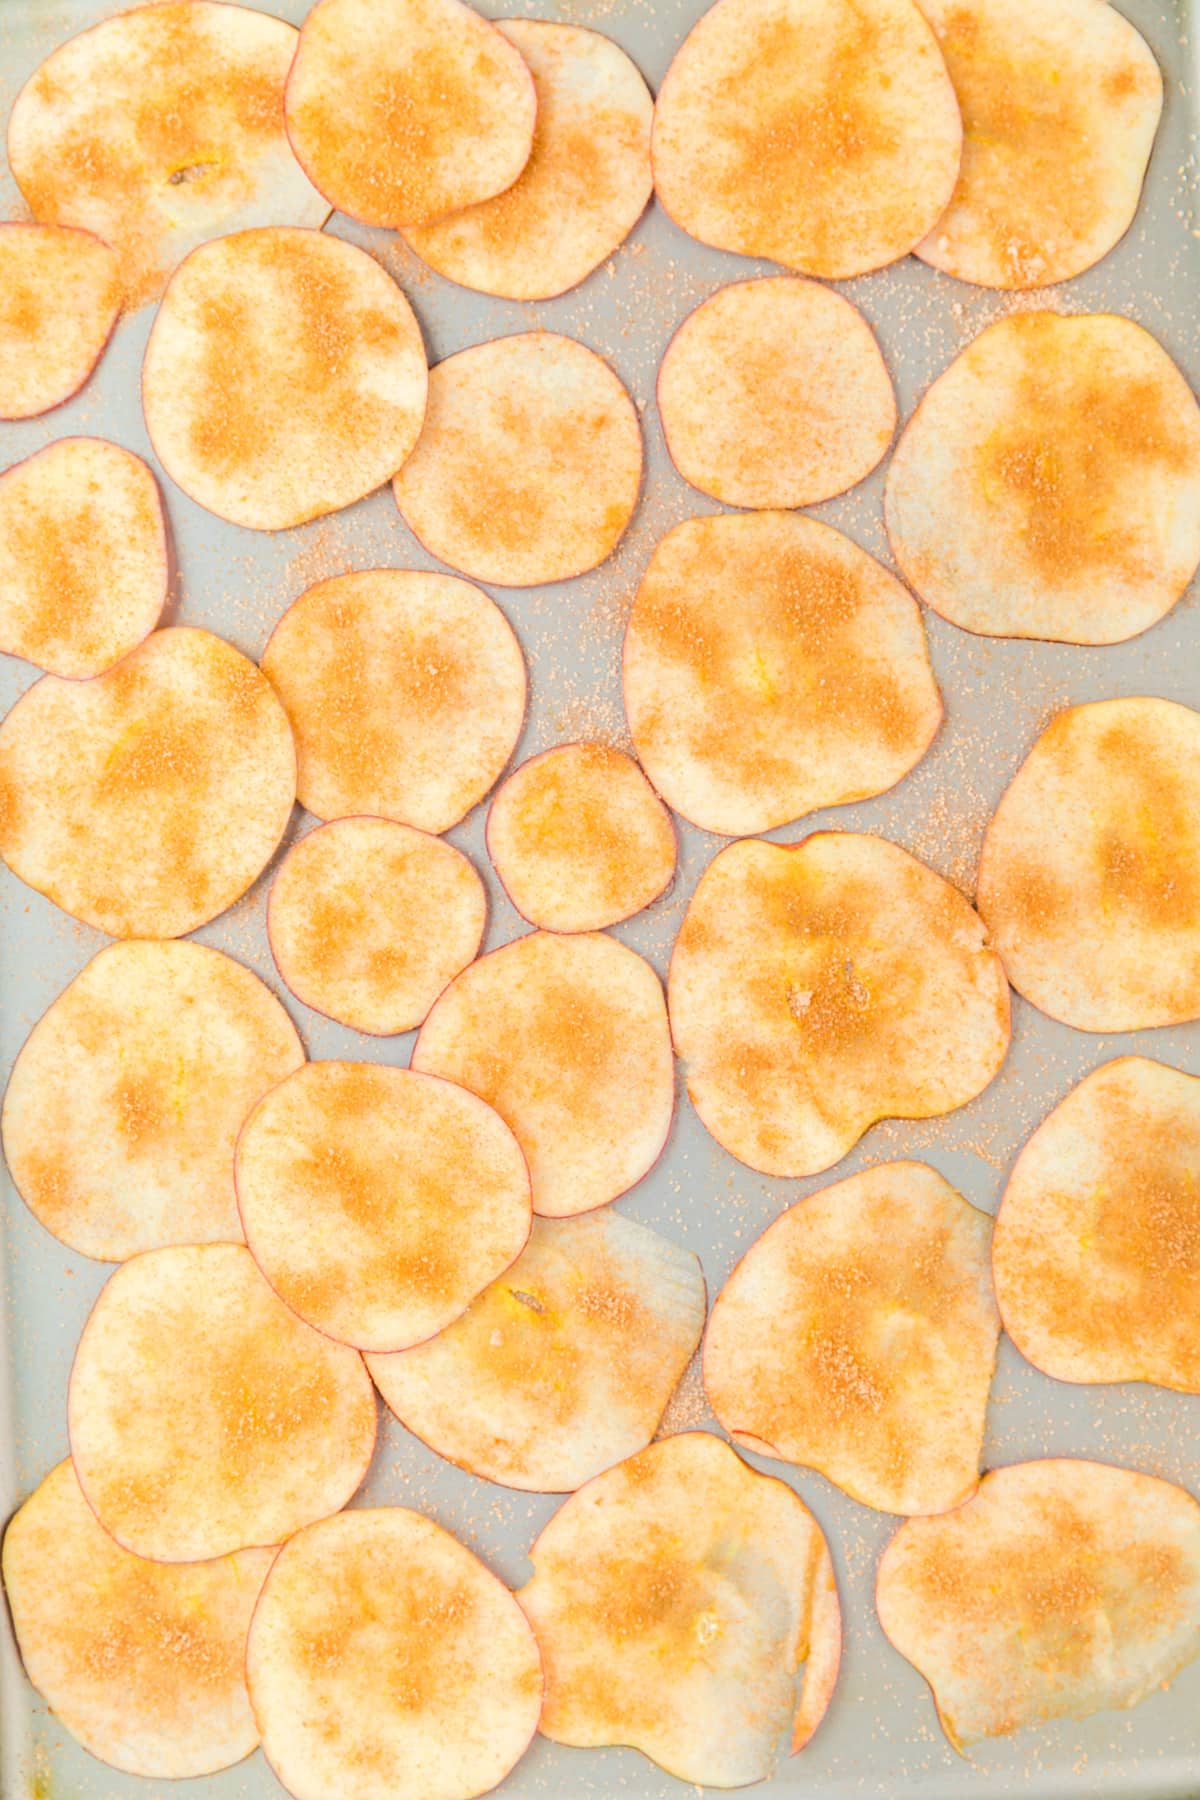 Thin apple slices covered in cinnamon sugar from above spread out.